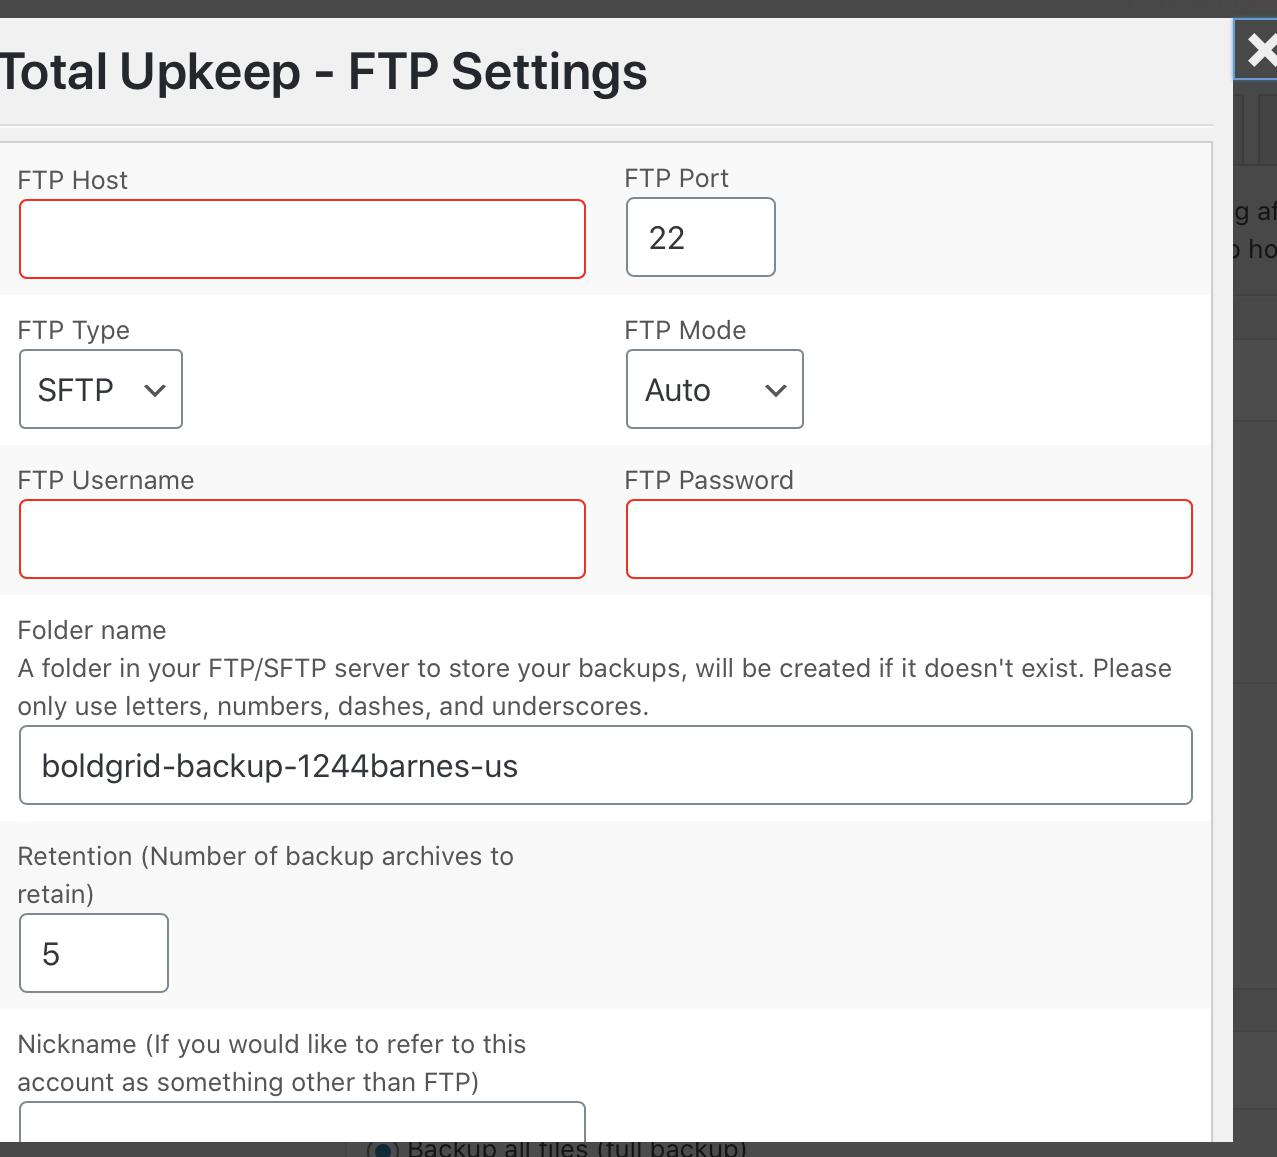 Total Upkeep FTP settings with empty fields